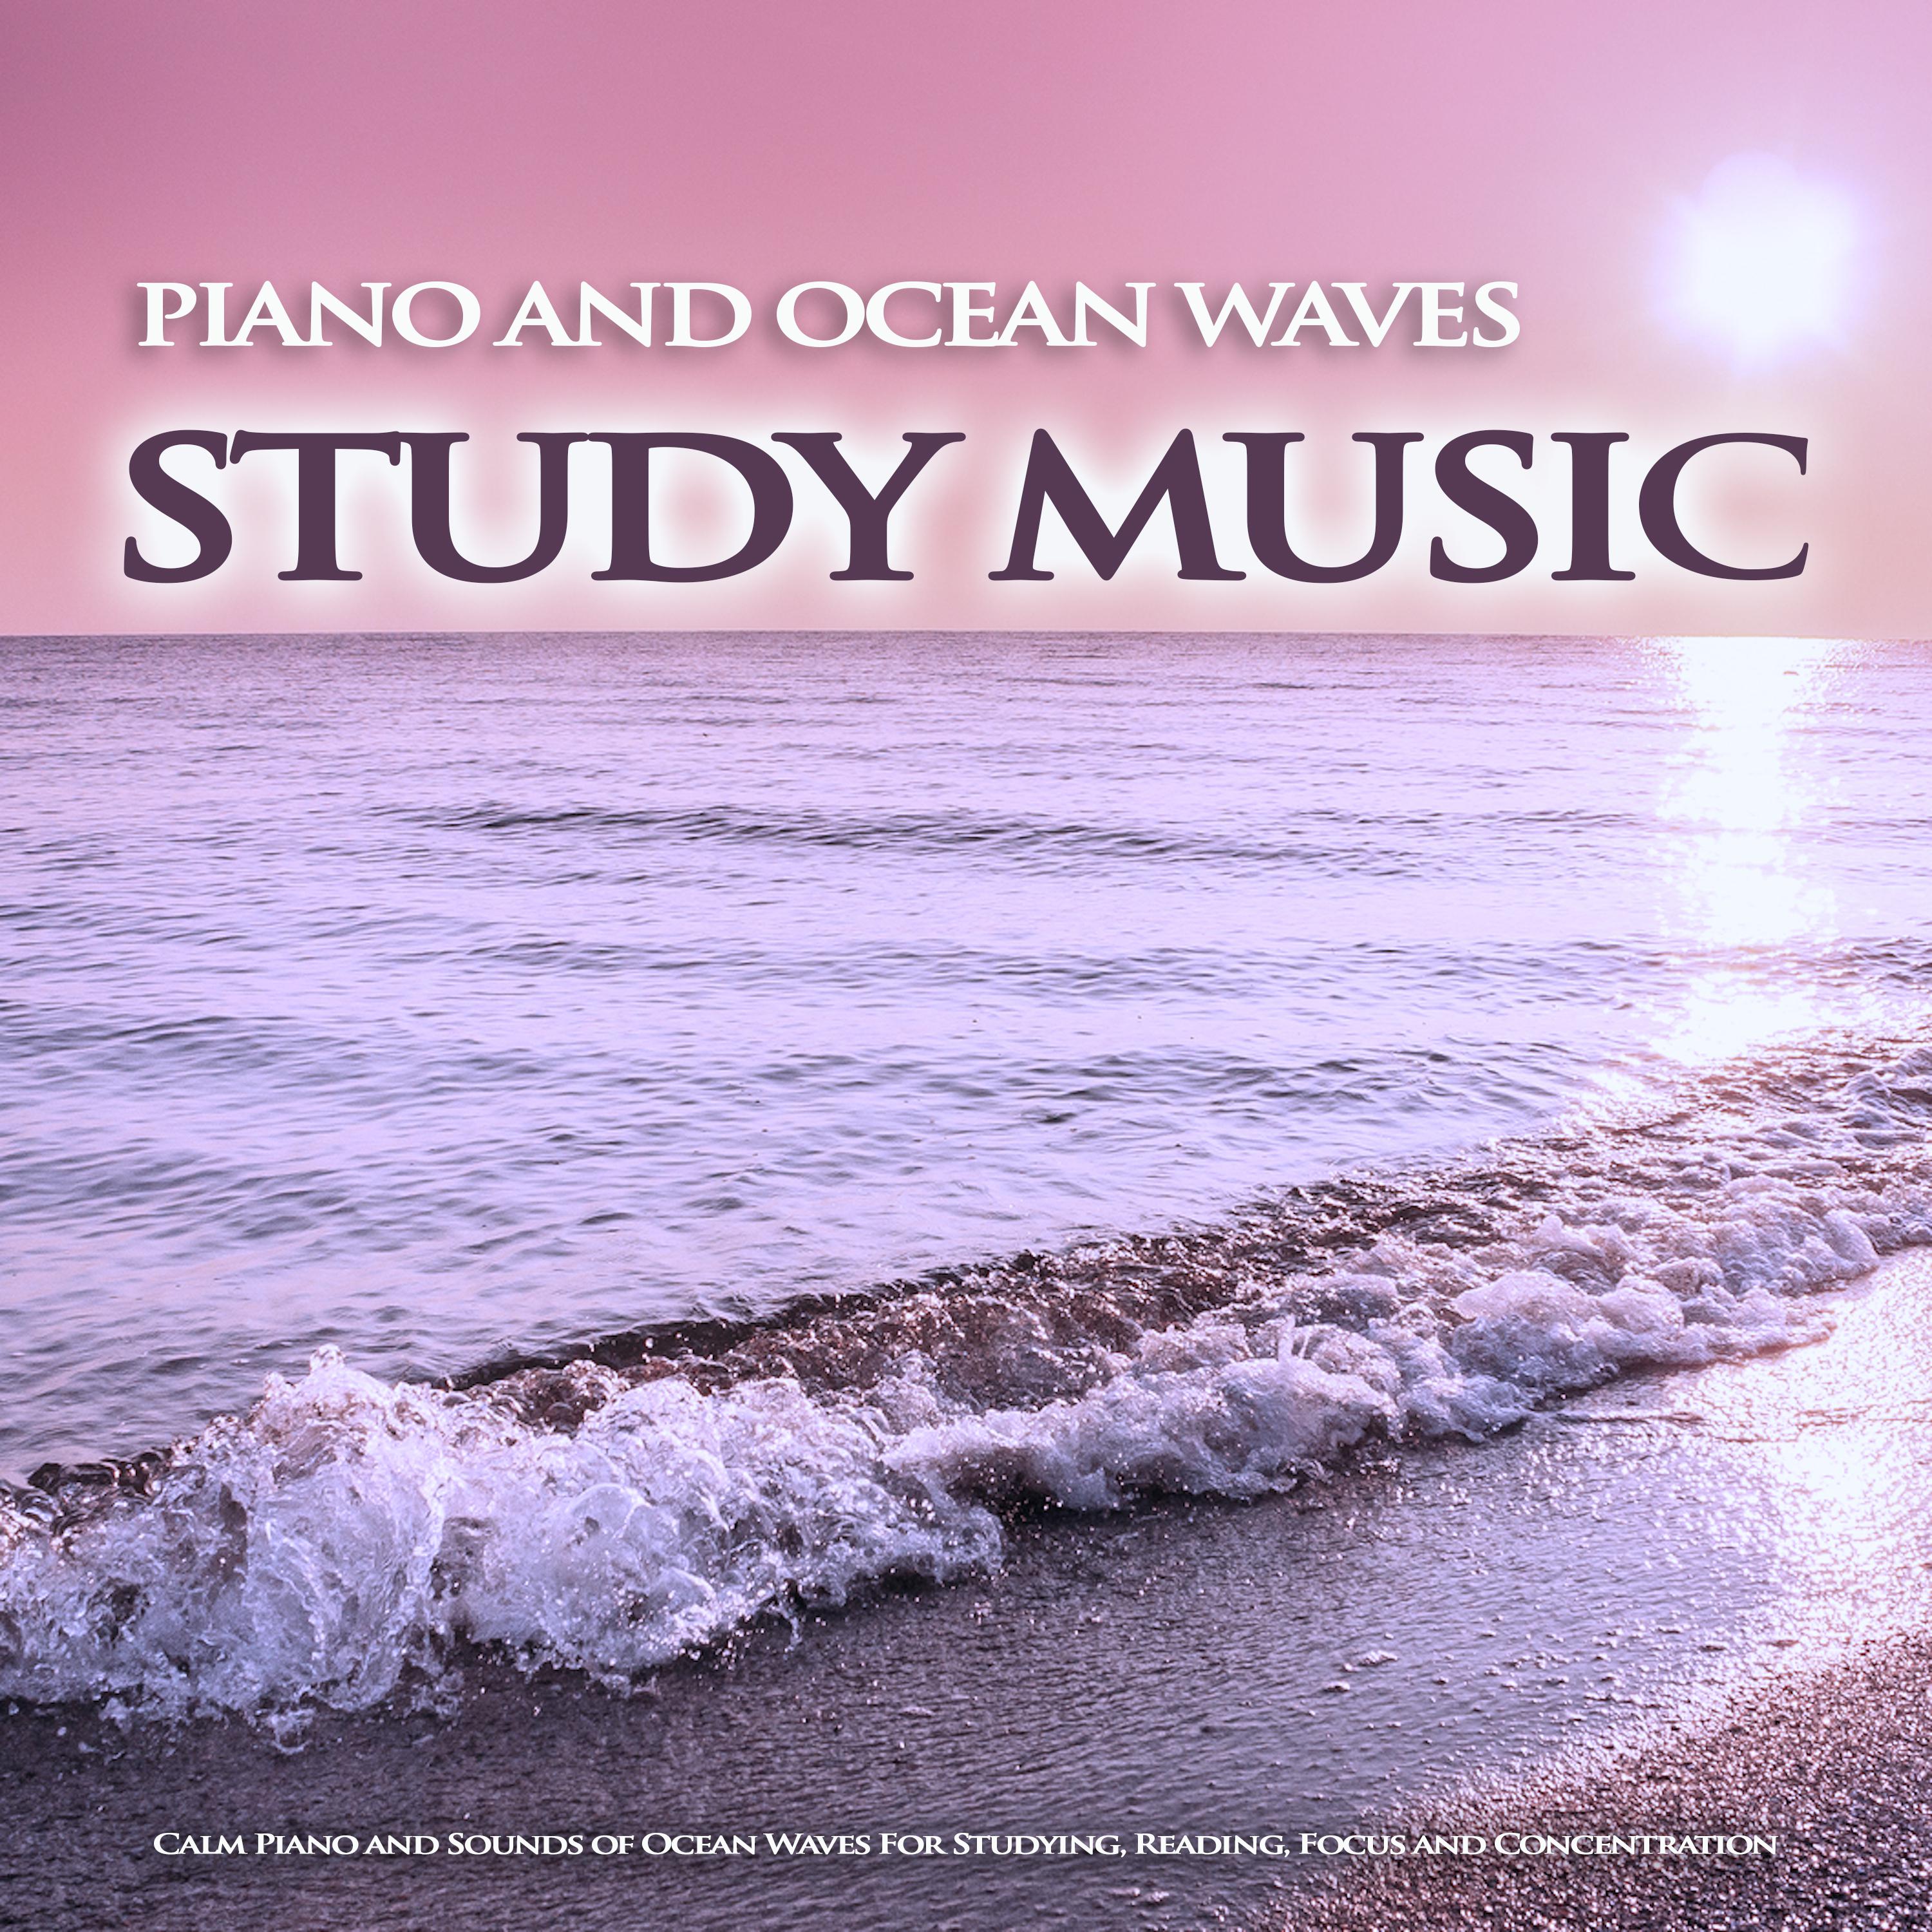 Calm Piano Music For Studying